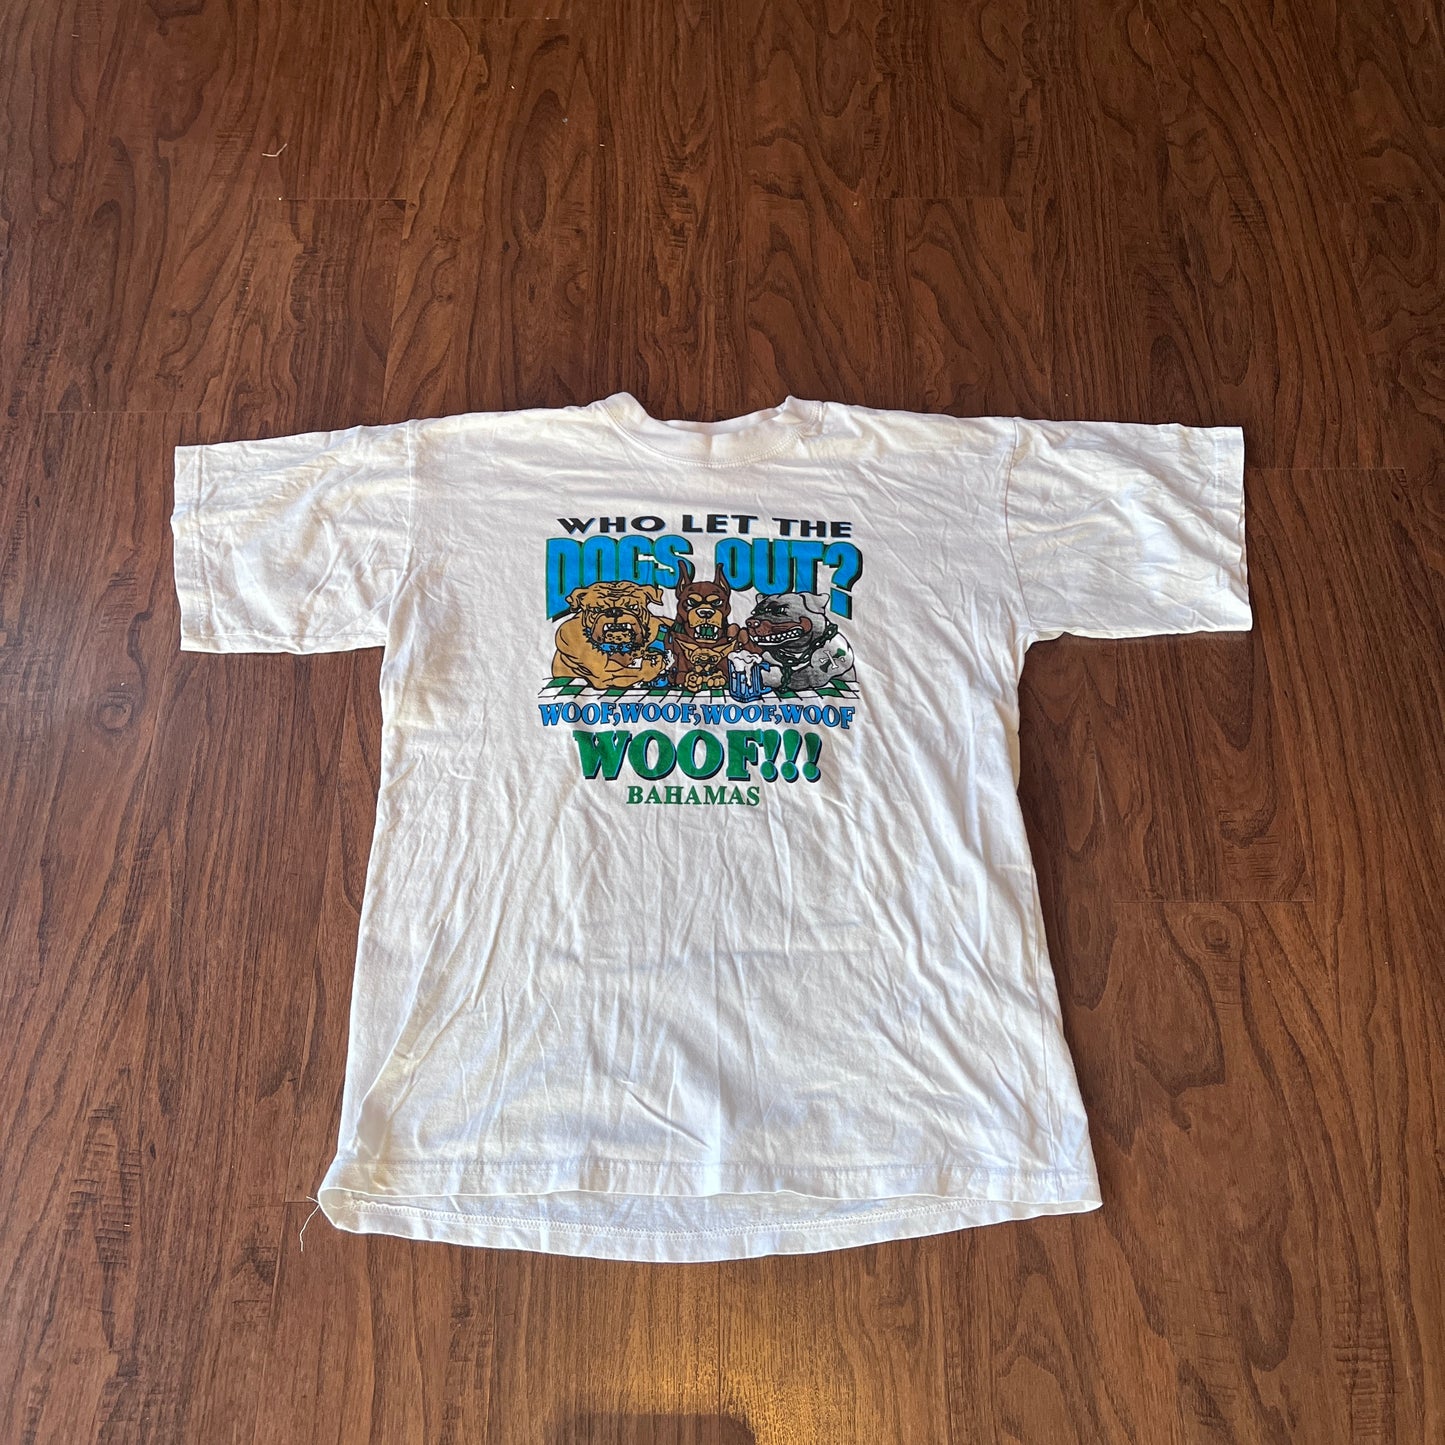 *VINTAGE* Who Let The Dogs Out Bahamas Tee (FITS LARGE)